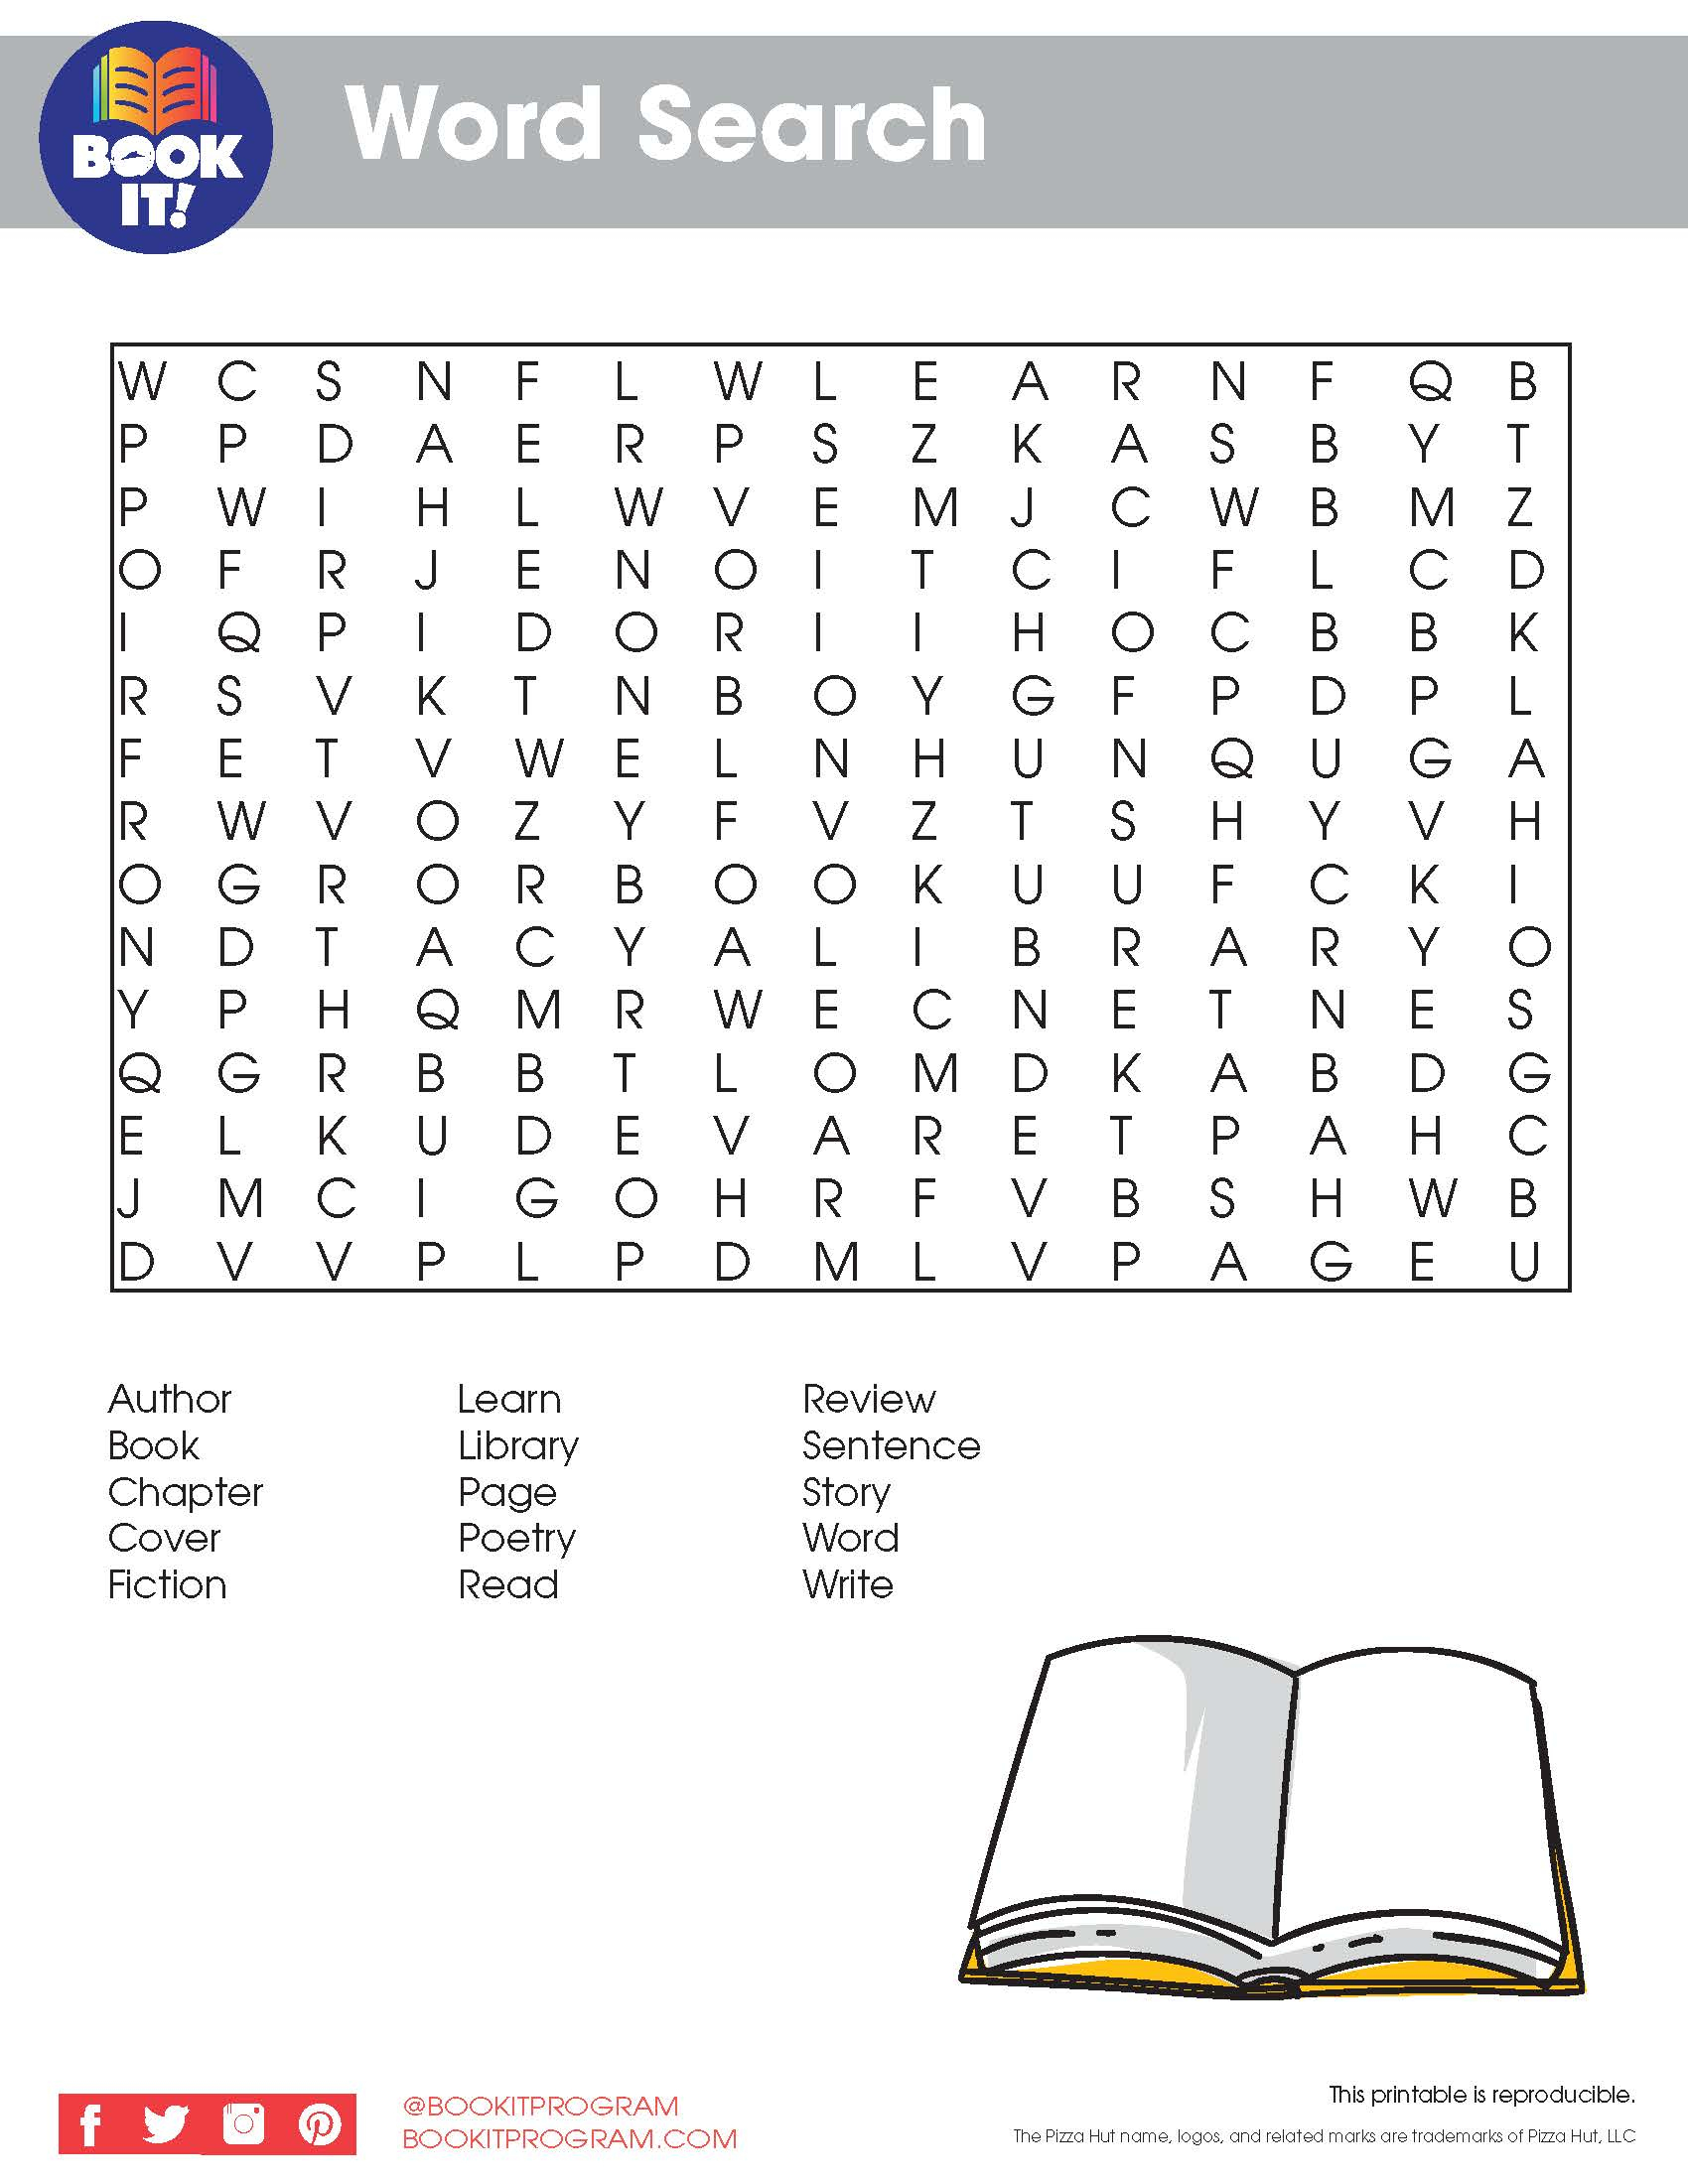 Reading Word Search | The Pizza Hut Book It! Program